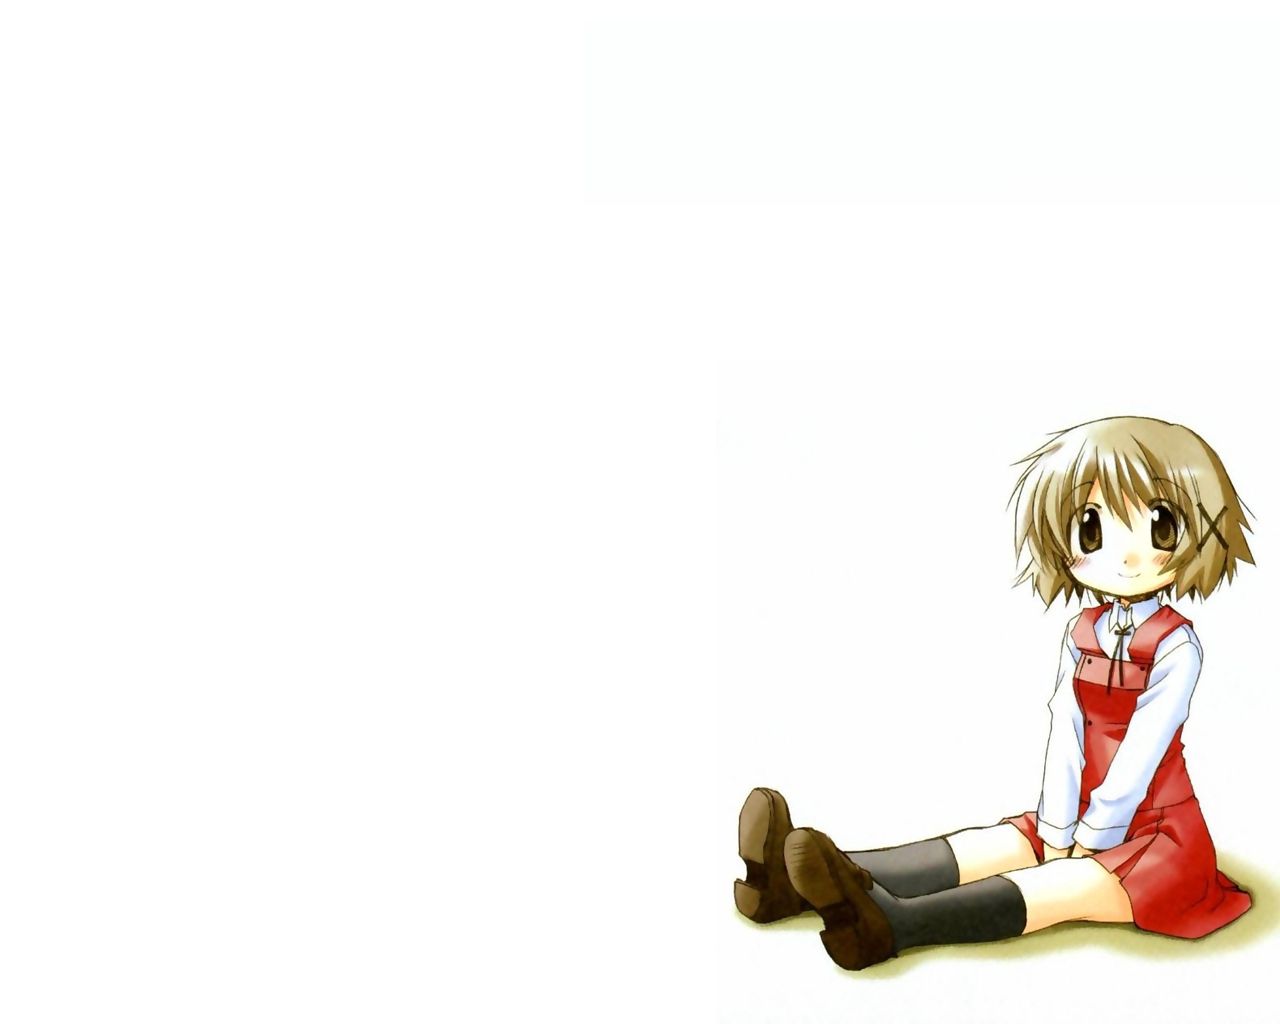 Download wallpaper 1280x1024 anime, girl, cute, dress, posture, background  hd background